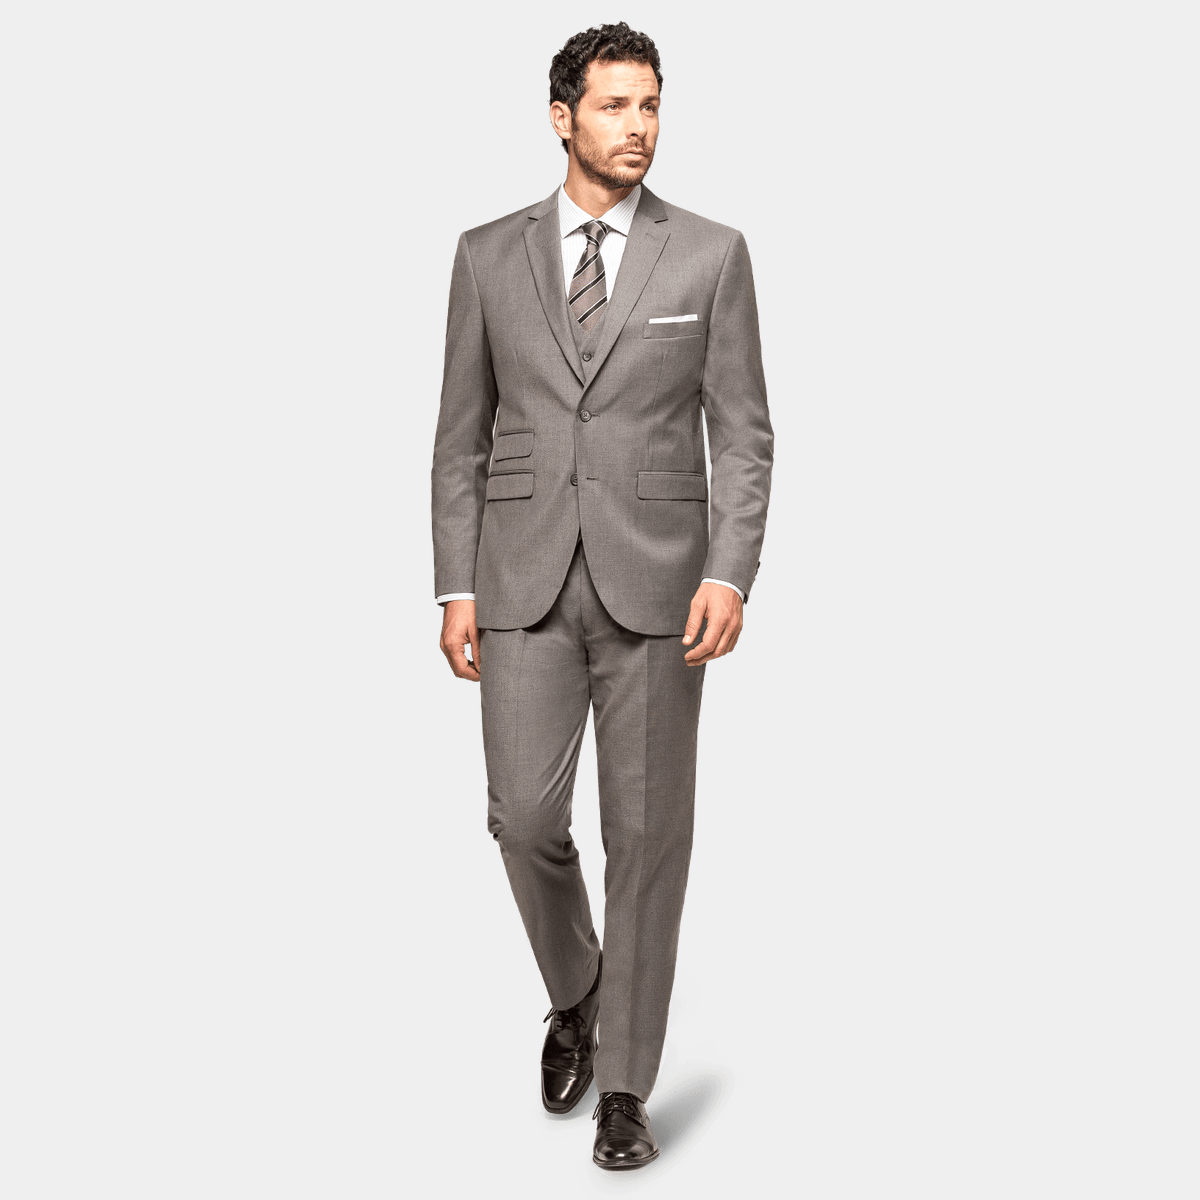 Grey pure wool 3 piece Suit with a pocket square